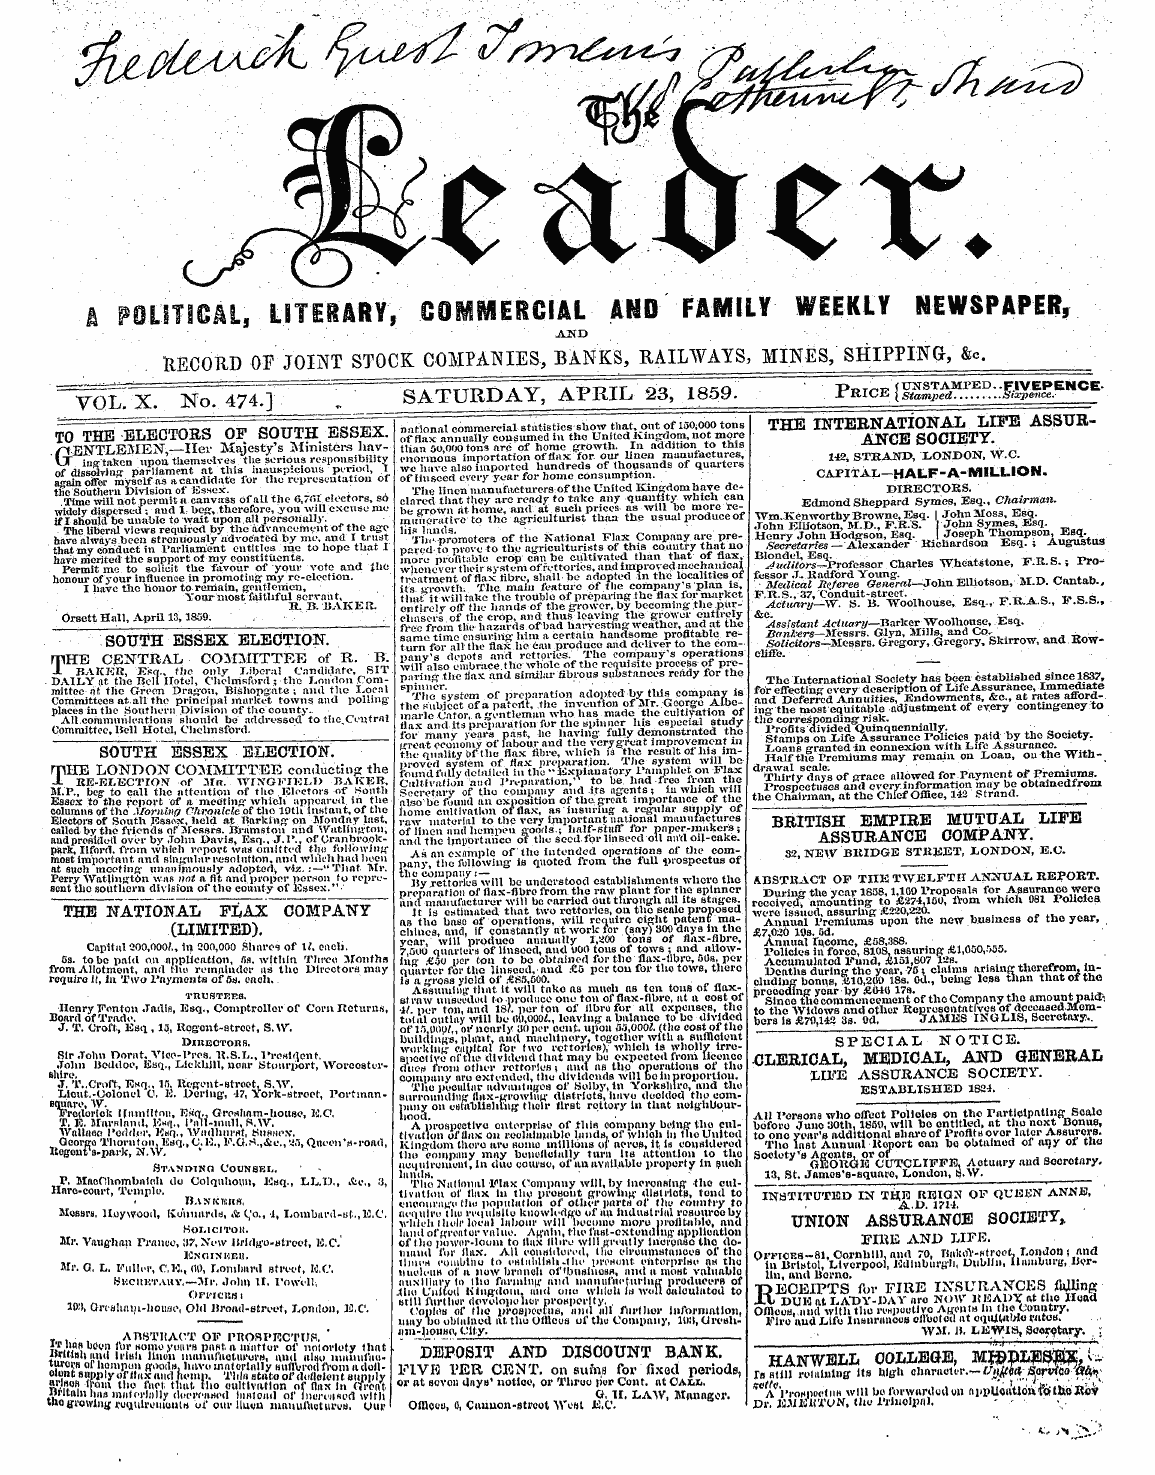 Leader (1850-1860): jS F Y, 2nd edition - Ad00104